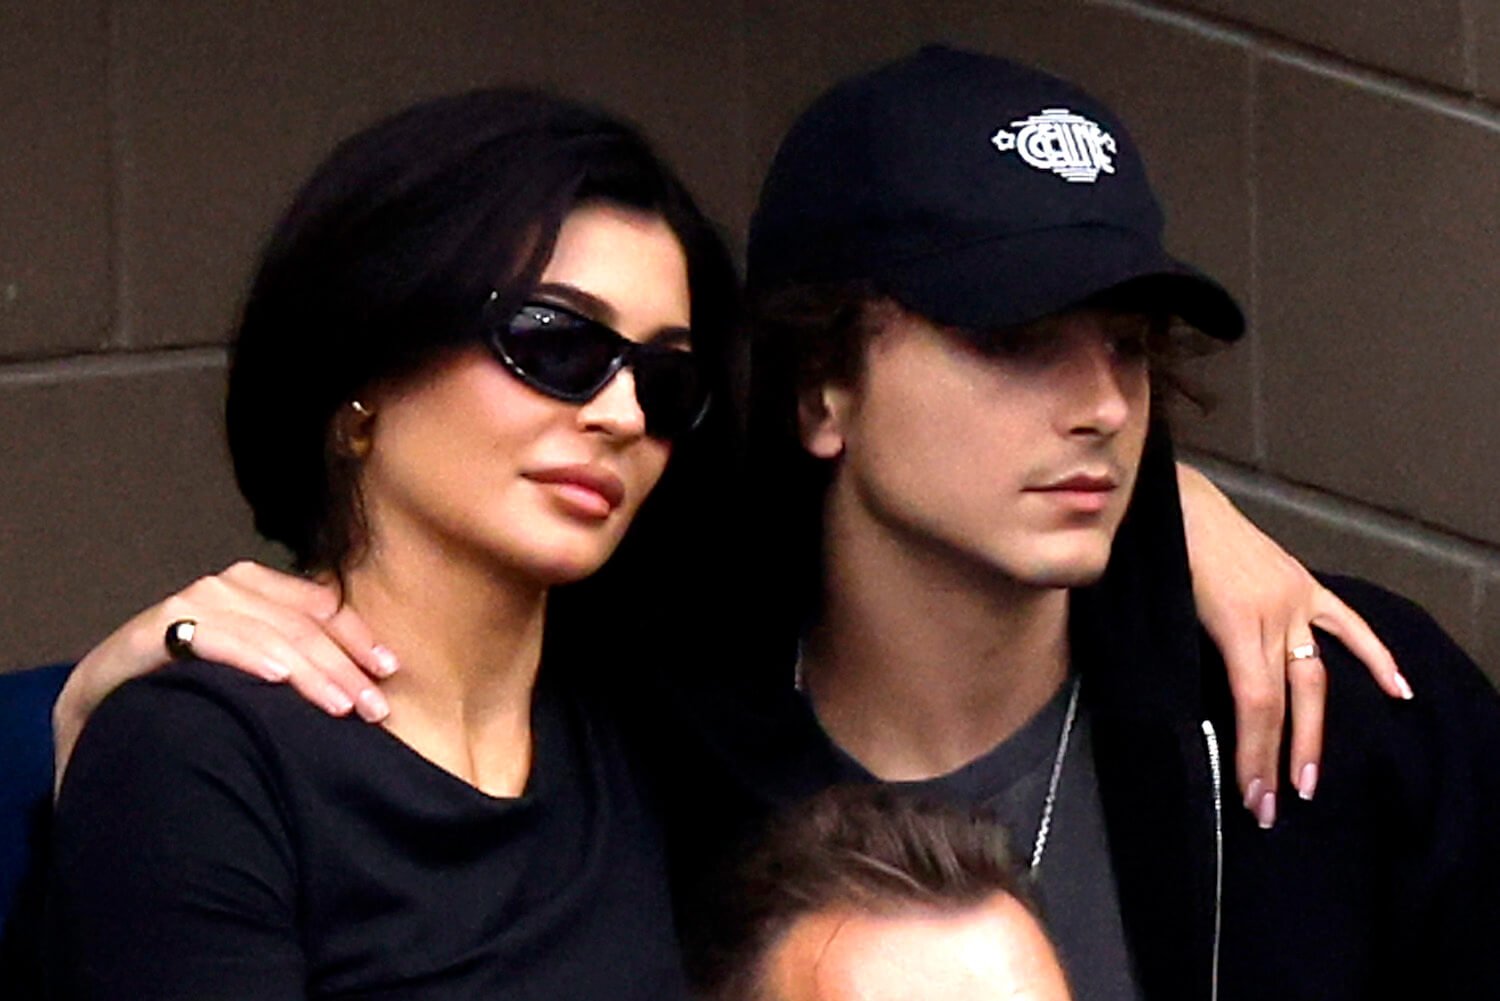 A close-up of Kylie Jenner wearing sunglasses and Timothée Chalamet wearing a hat at the US Open in 2023. They have their arms around each other.